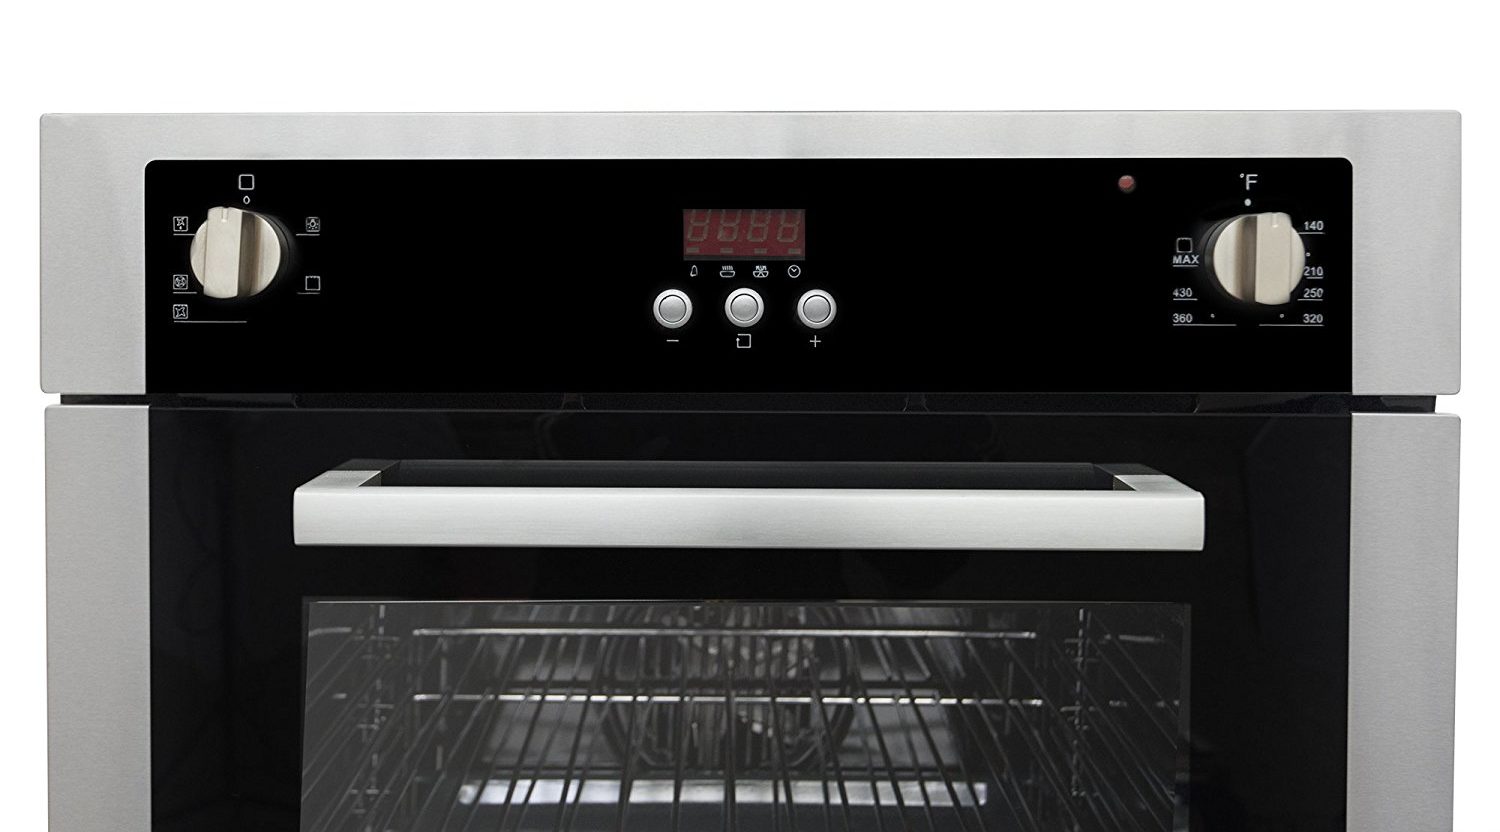 Cosmo C51EIX 24 in. Single Wall Electric Convection Oven with 5 Functions in Stainless Steel